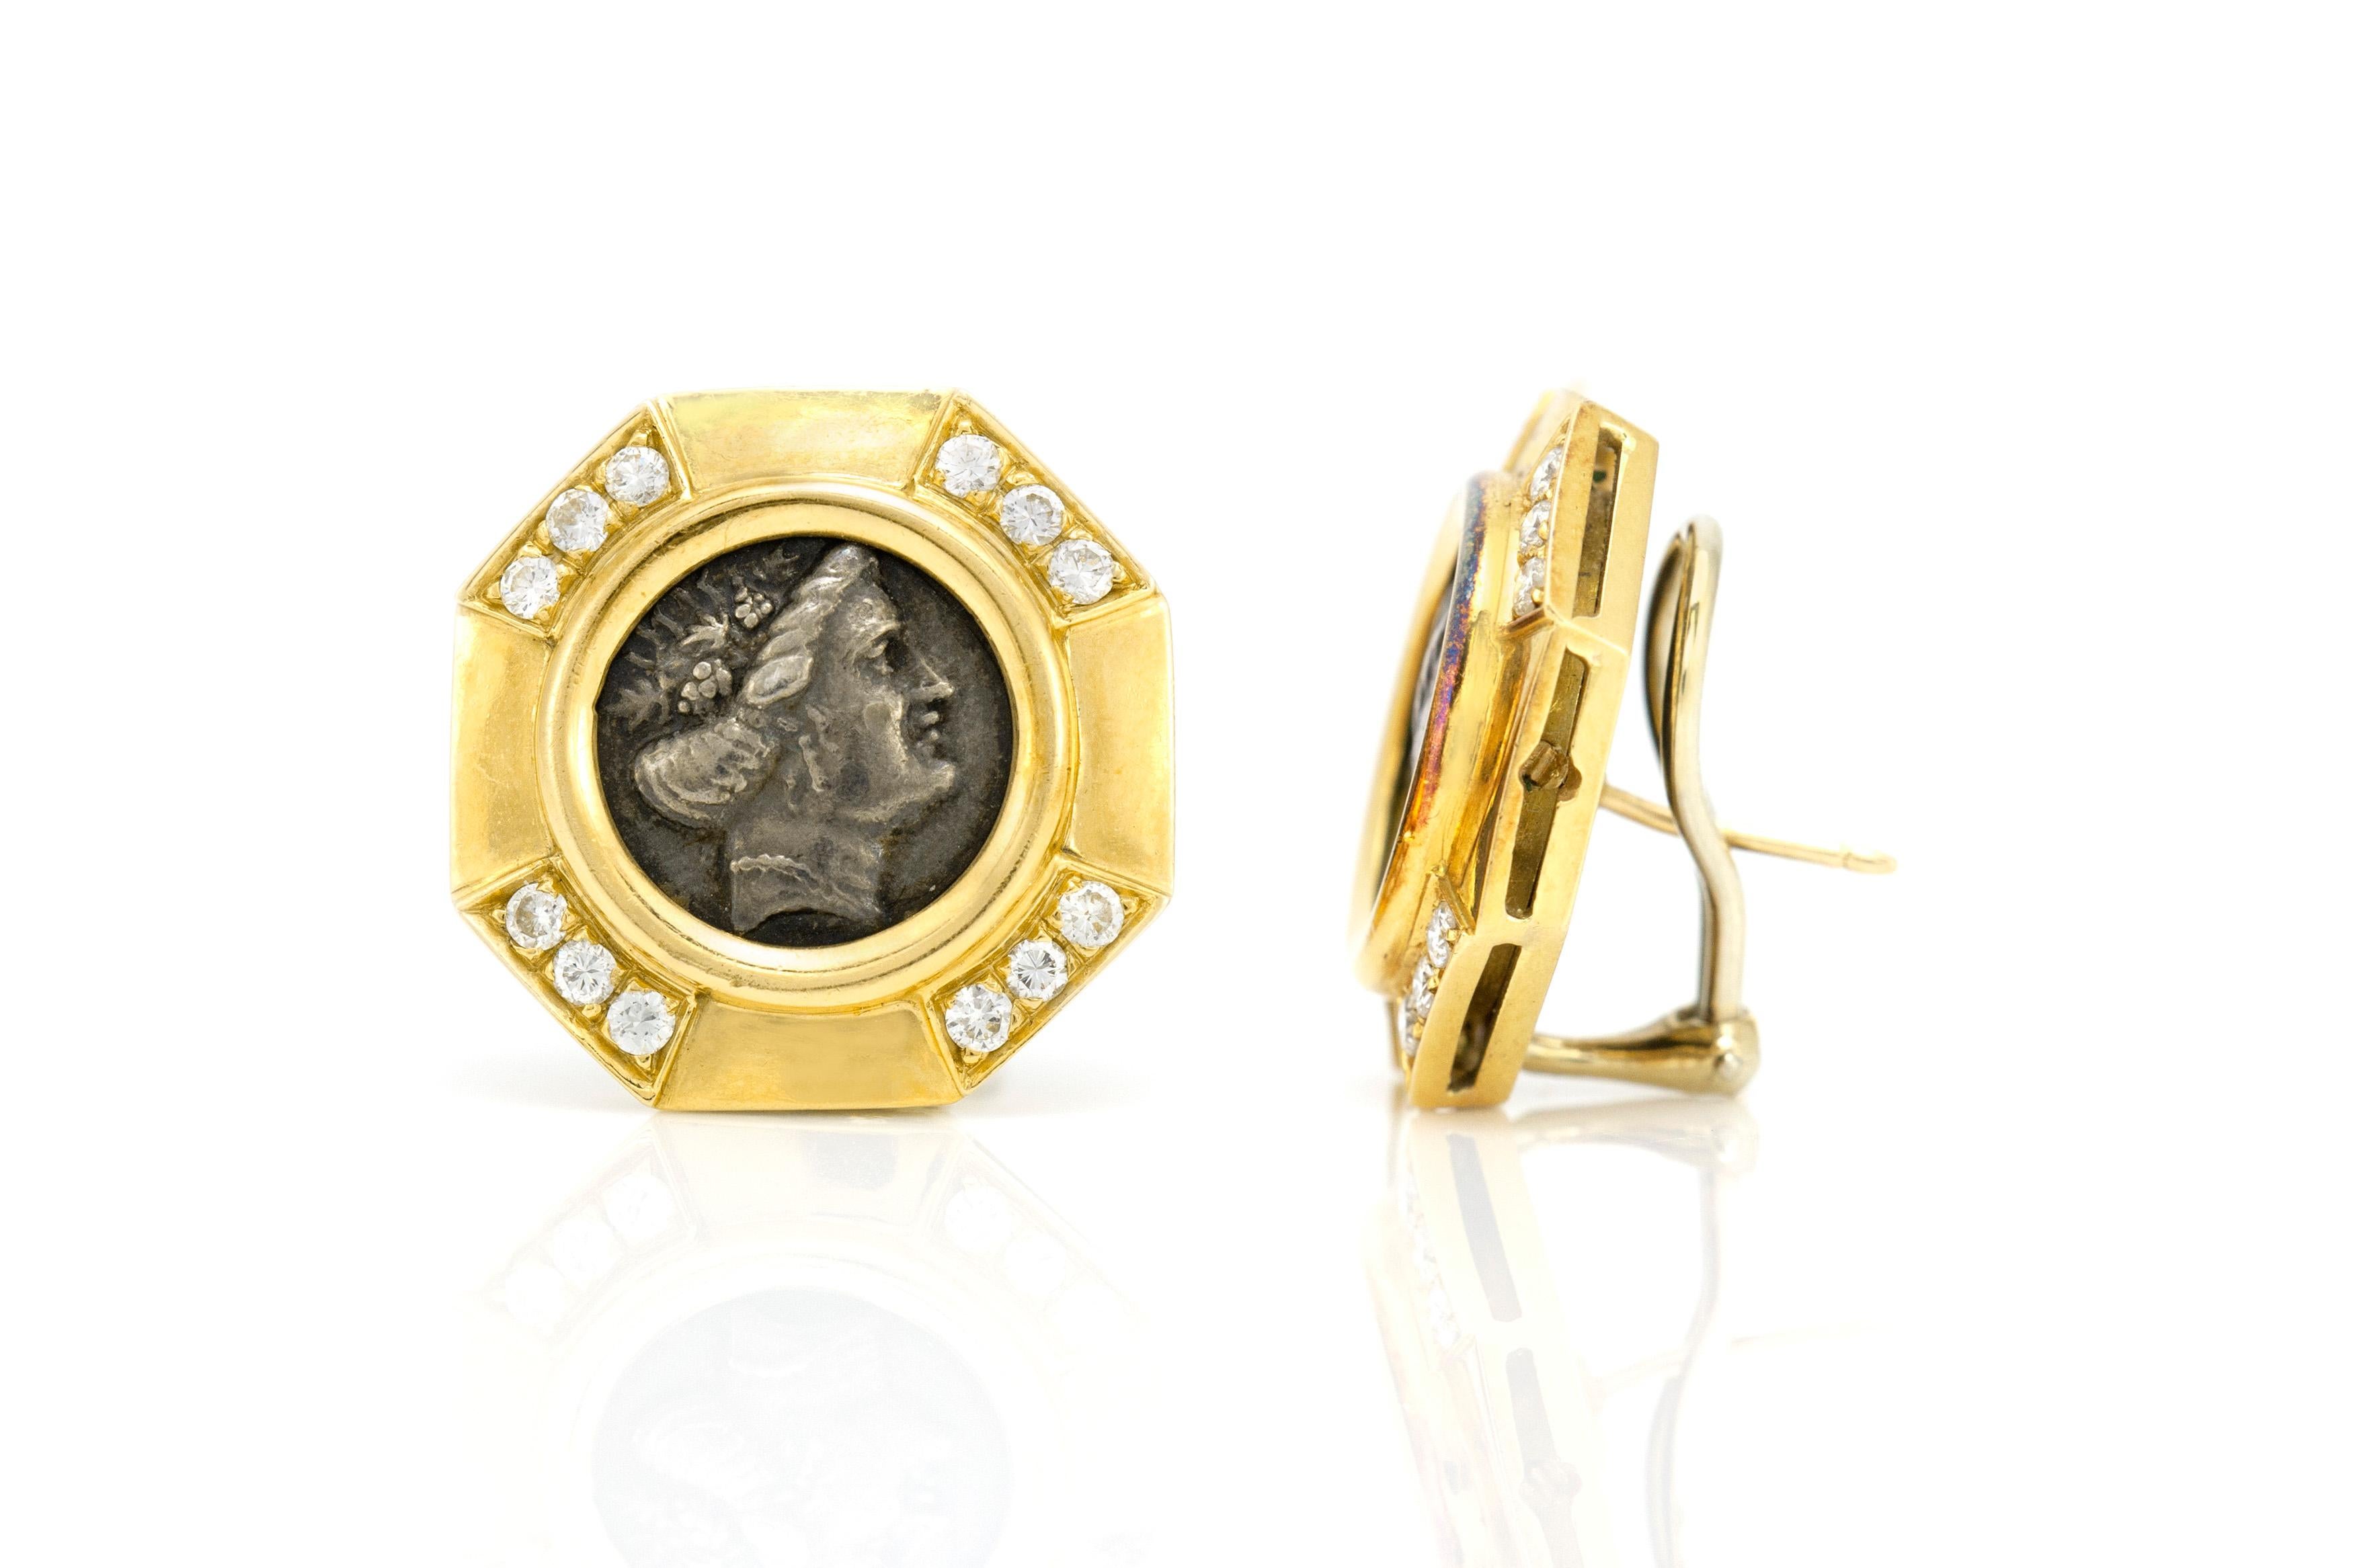 The coin earrings is finely crafted in 18k yellow gold with diamonds weighing approximately total of 1.00 carat.